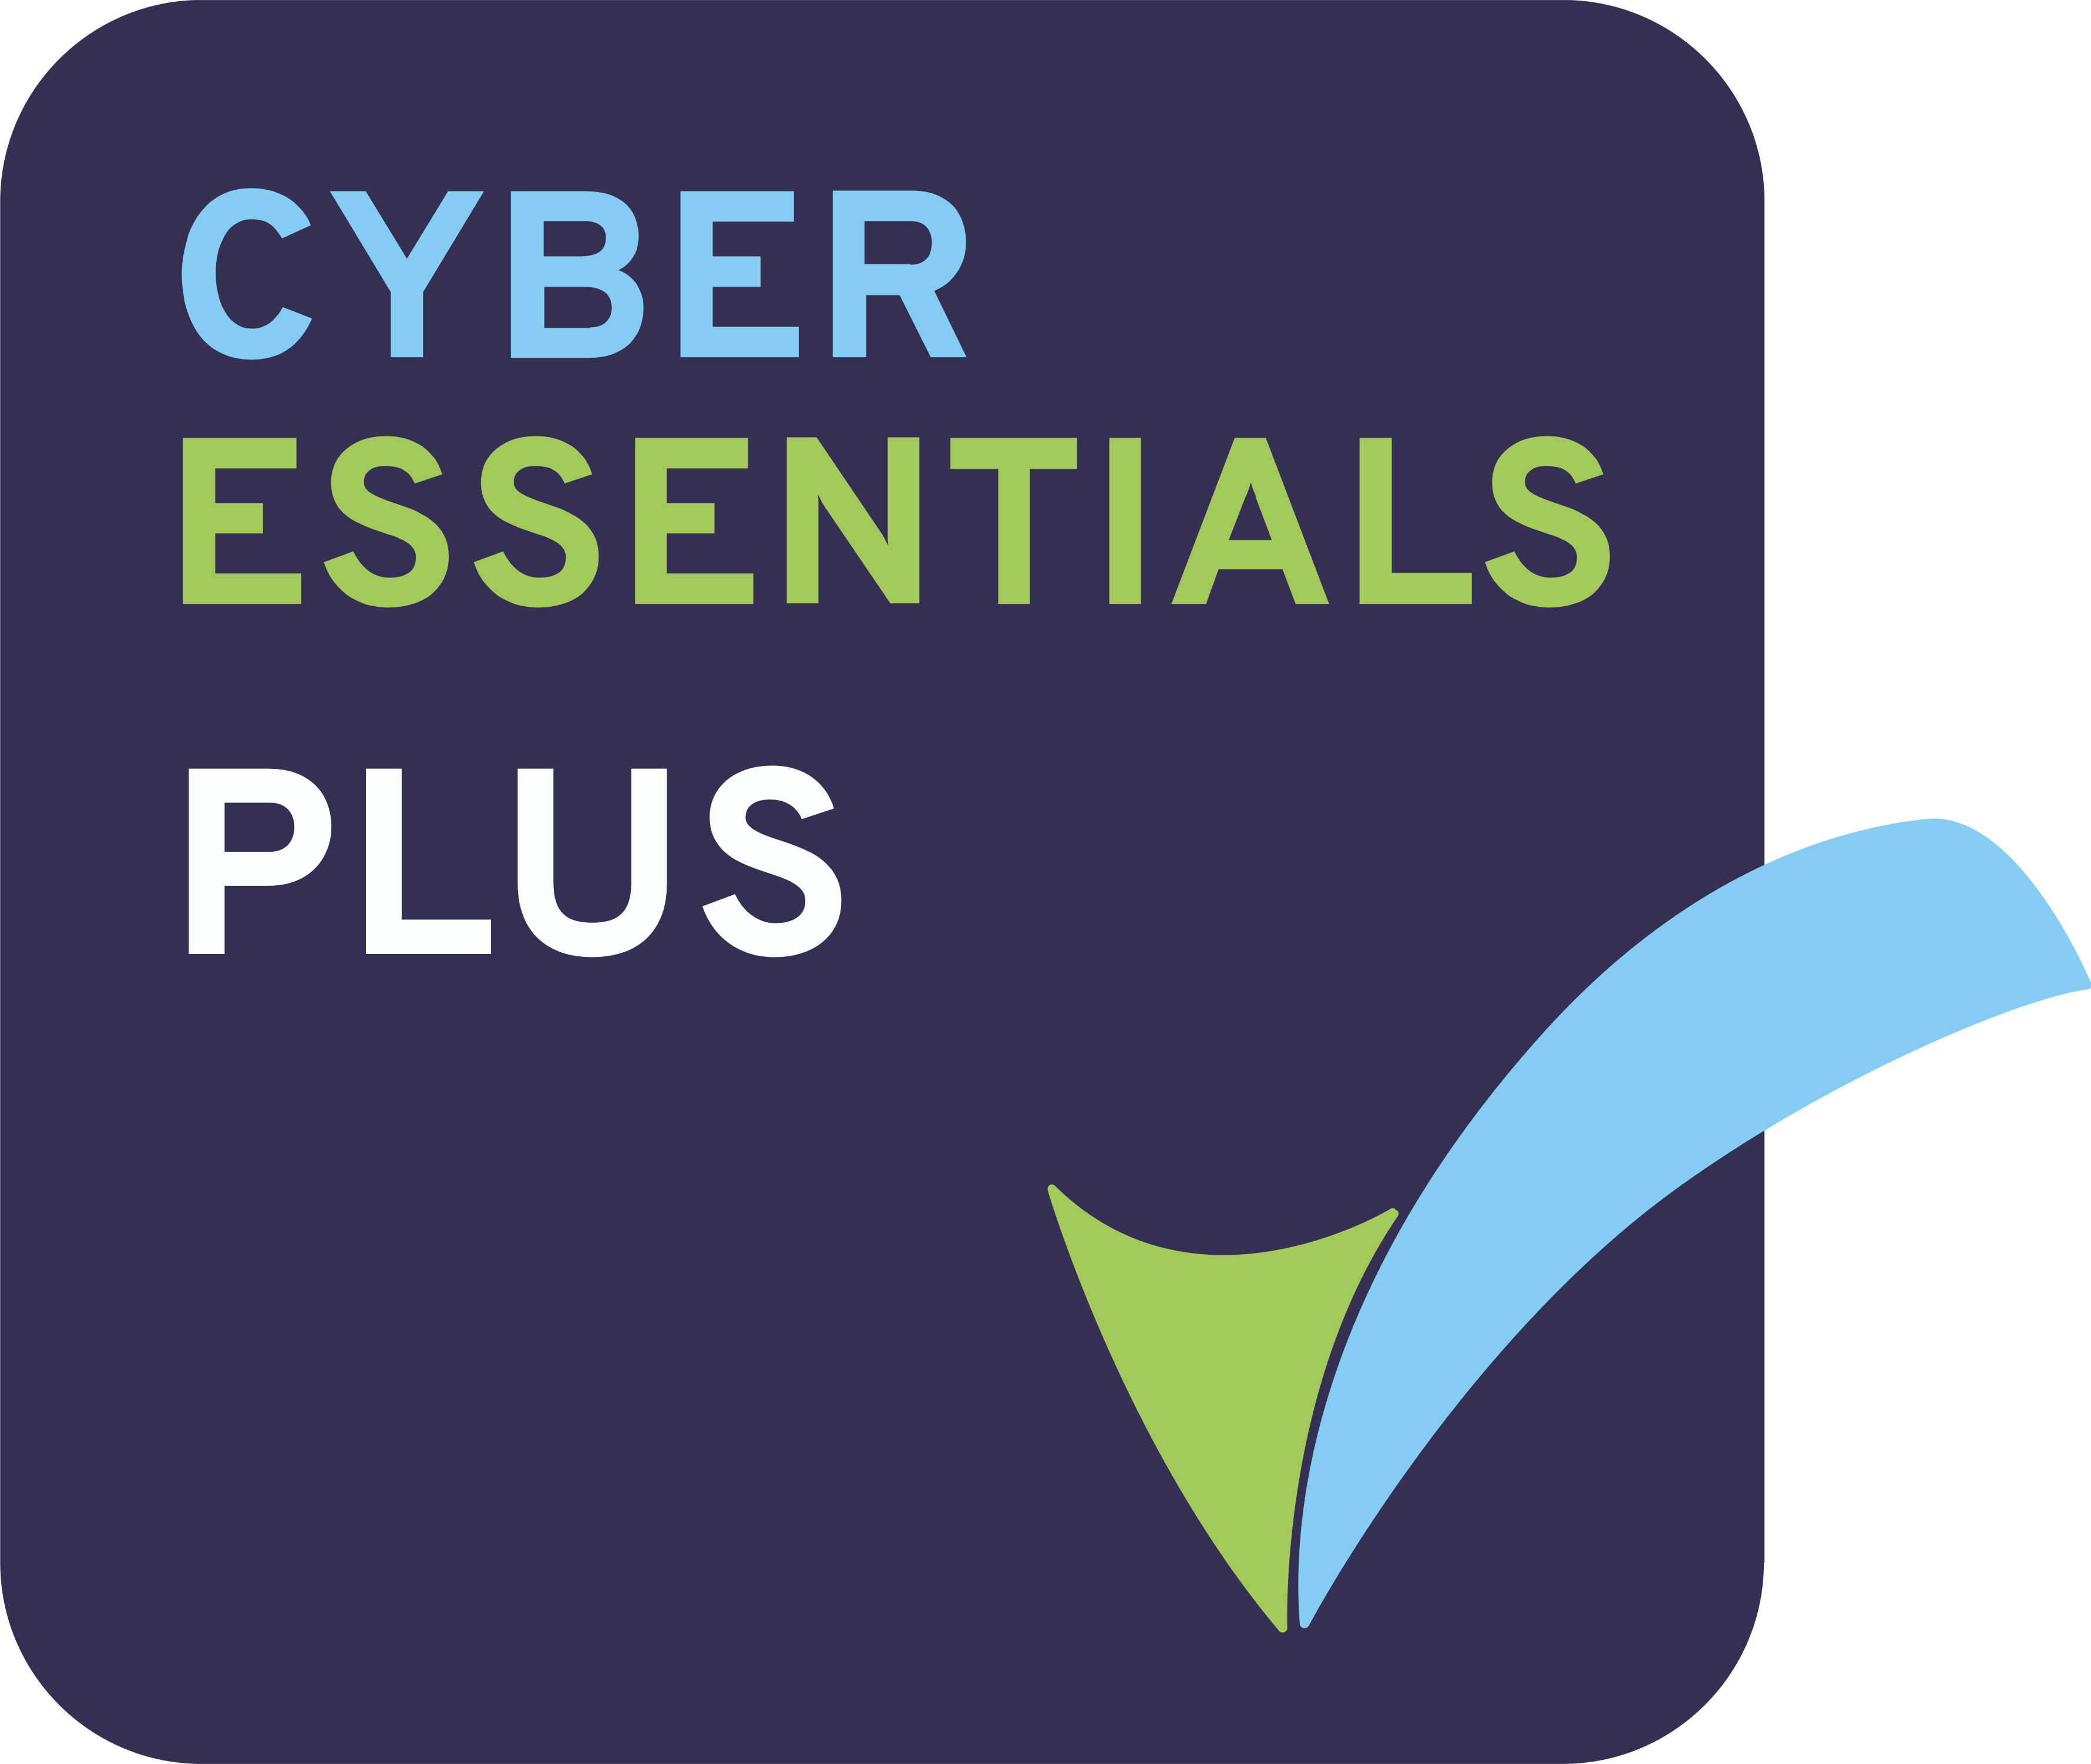 Cyber Essential Plus Technical Office